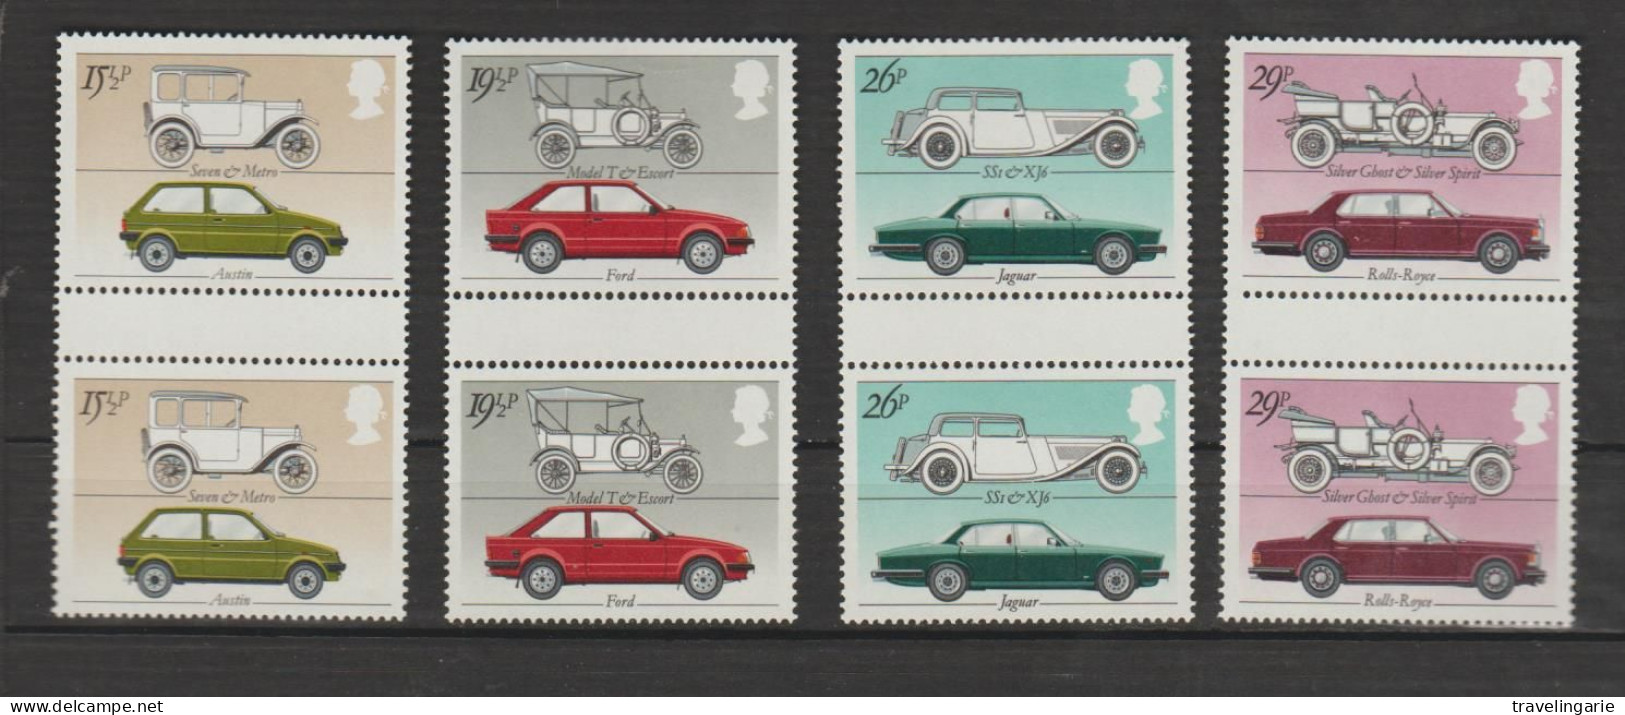 Great Britain 1982 British Motor Cars Gutter Pairs MNH ** - Unused Stamps